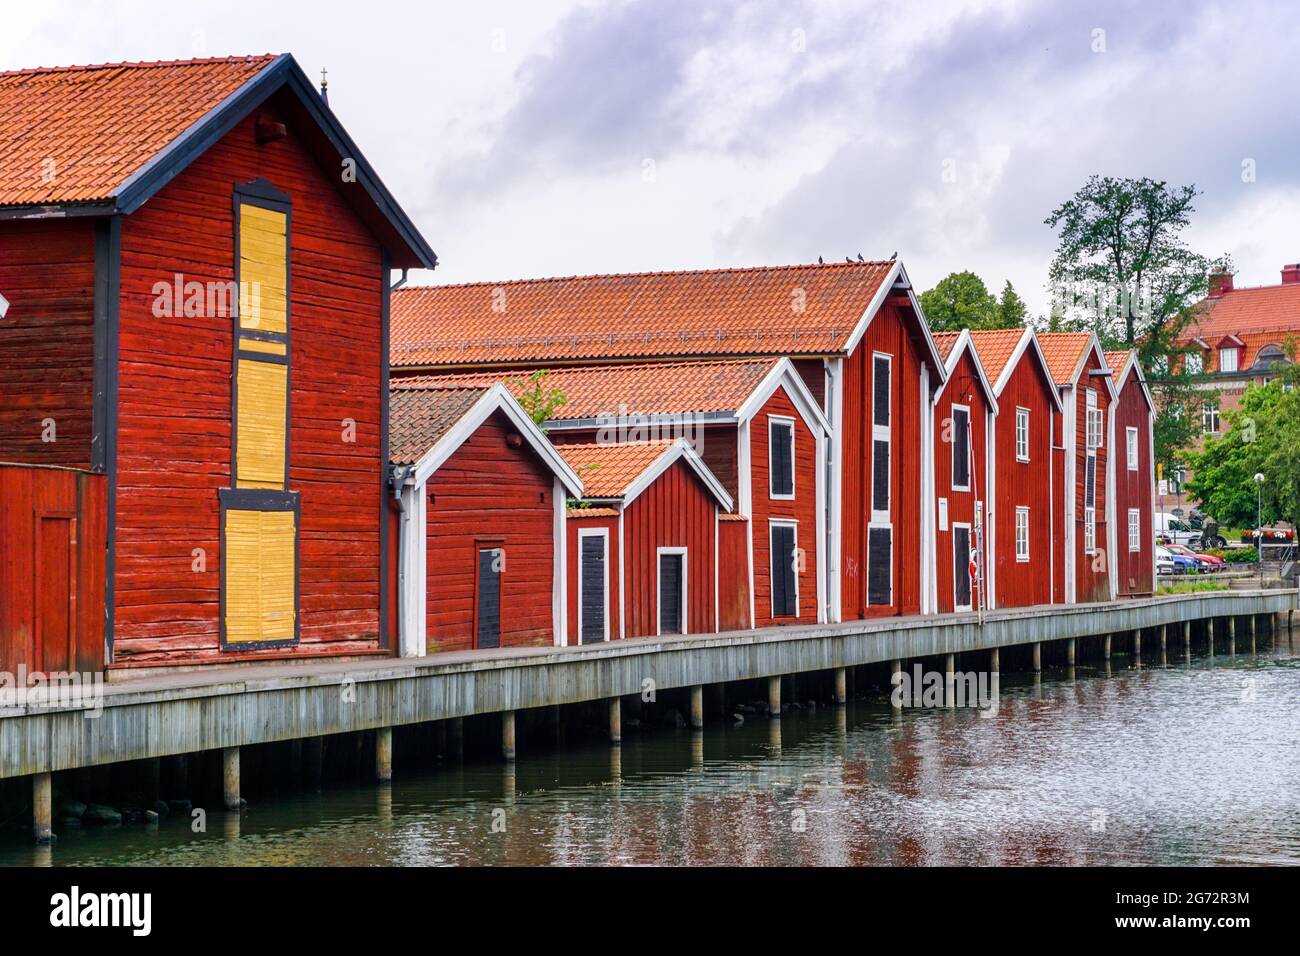 Hudiksvall, Sweden - 7 July, 2021: red and brown wooden warehouses along the waterfront in Hudiksvall Stock Photo